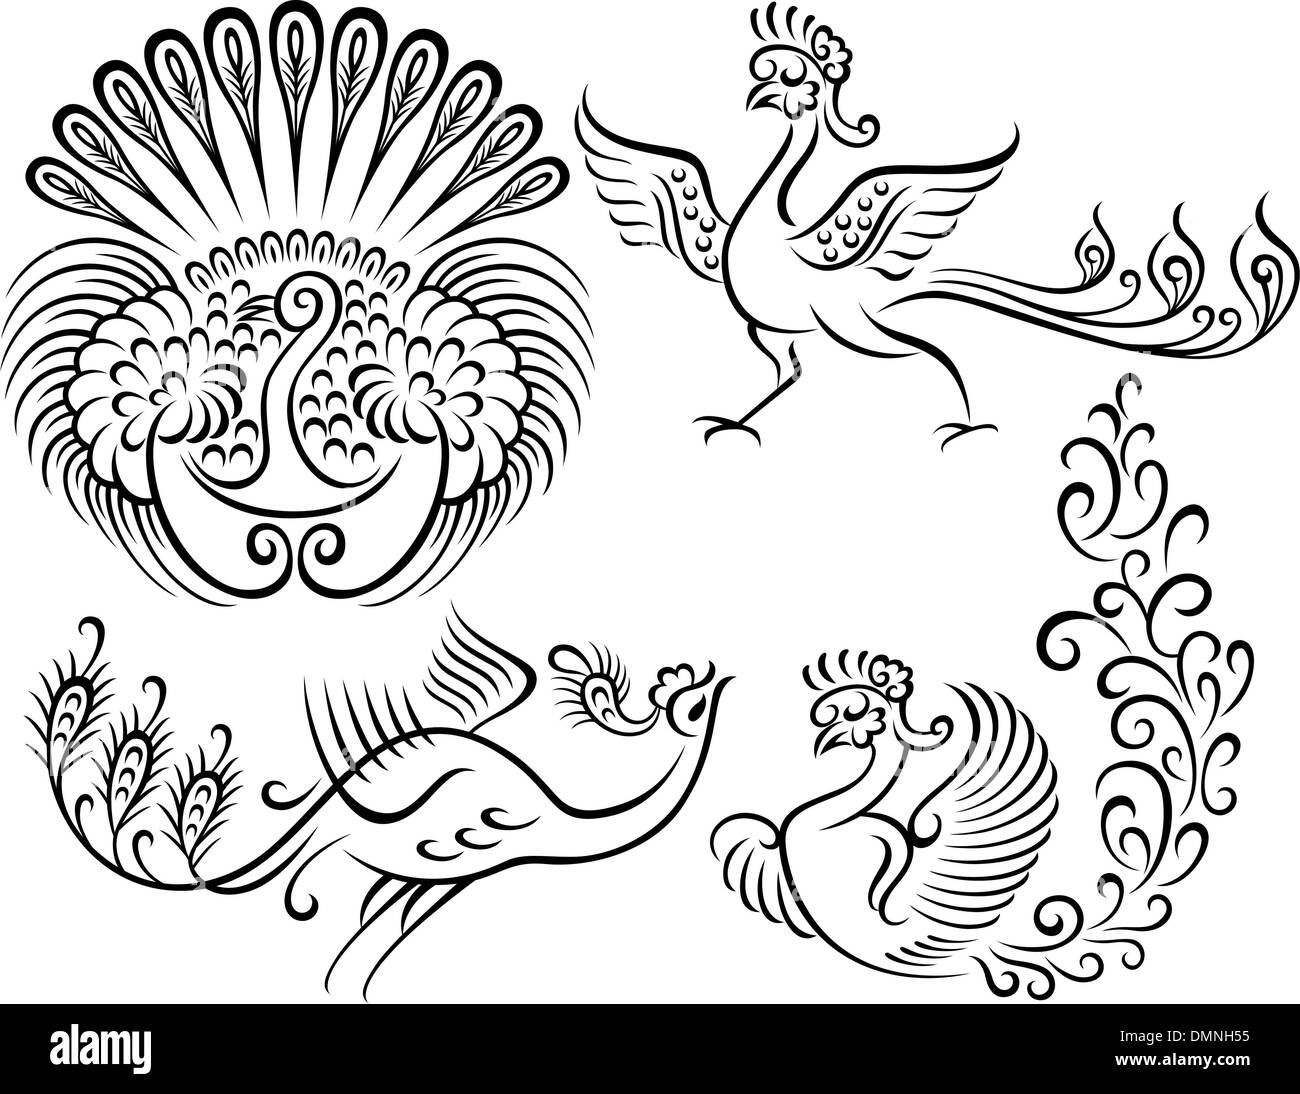 30+ Best Peacock Tattoo Design Ideas: What Is Your Favorite - Saved Tattoo